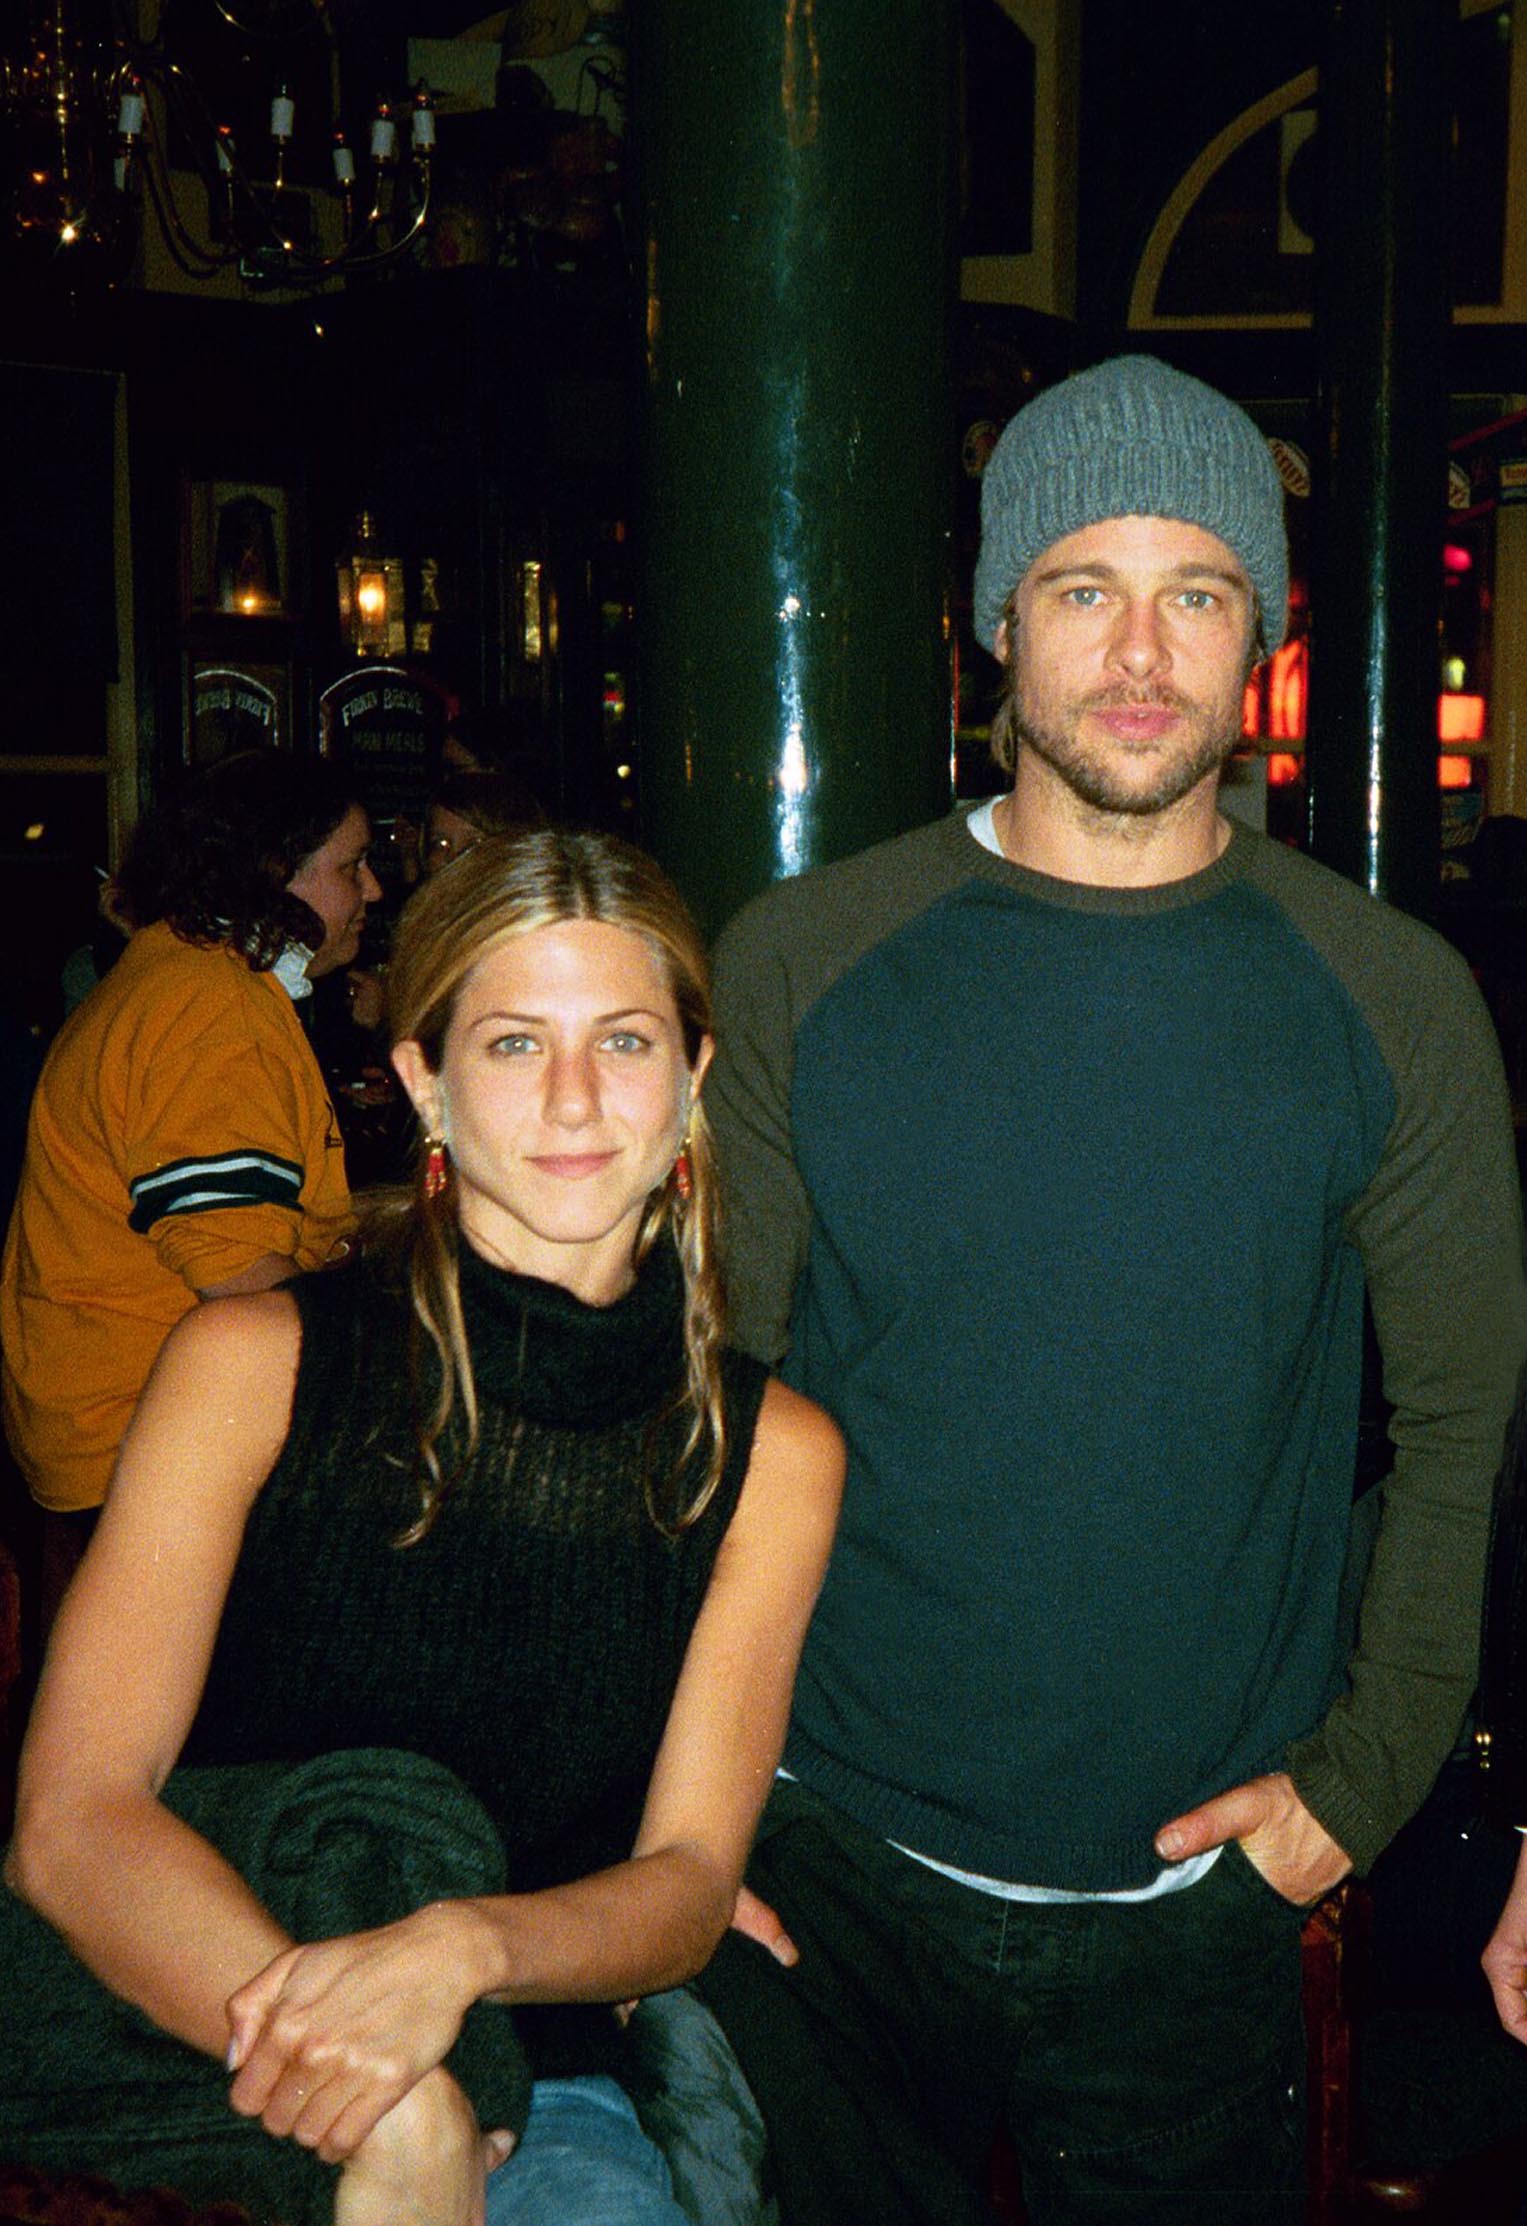 Brad Pitt and Jennifer Aniston's Relationship Timeline: Amicable